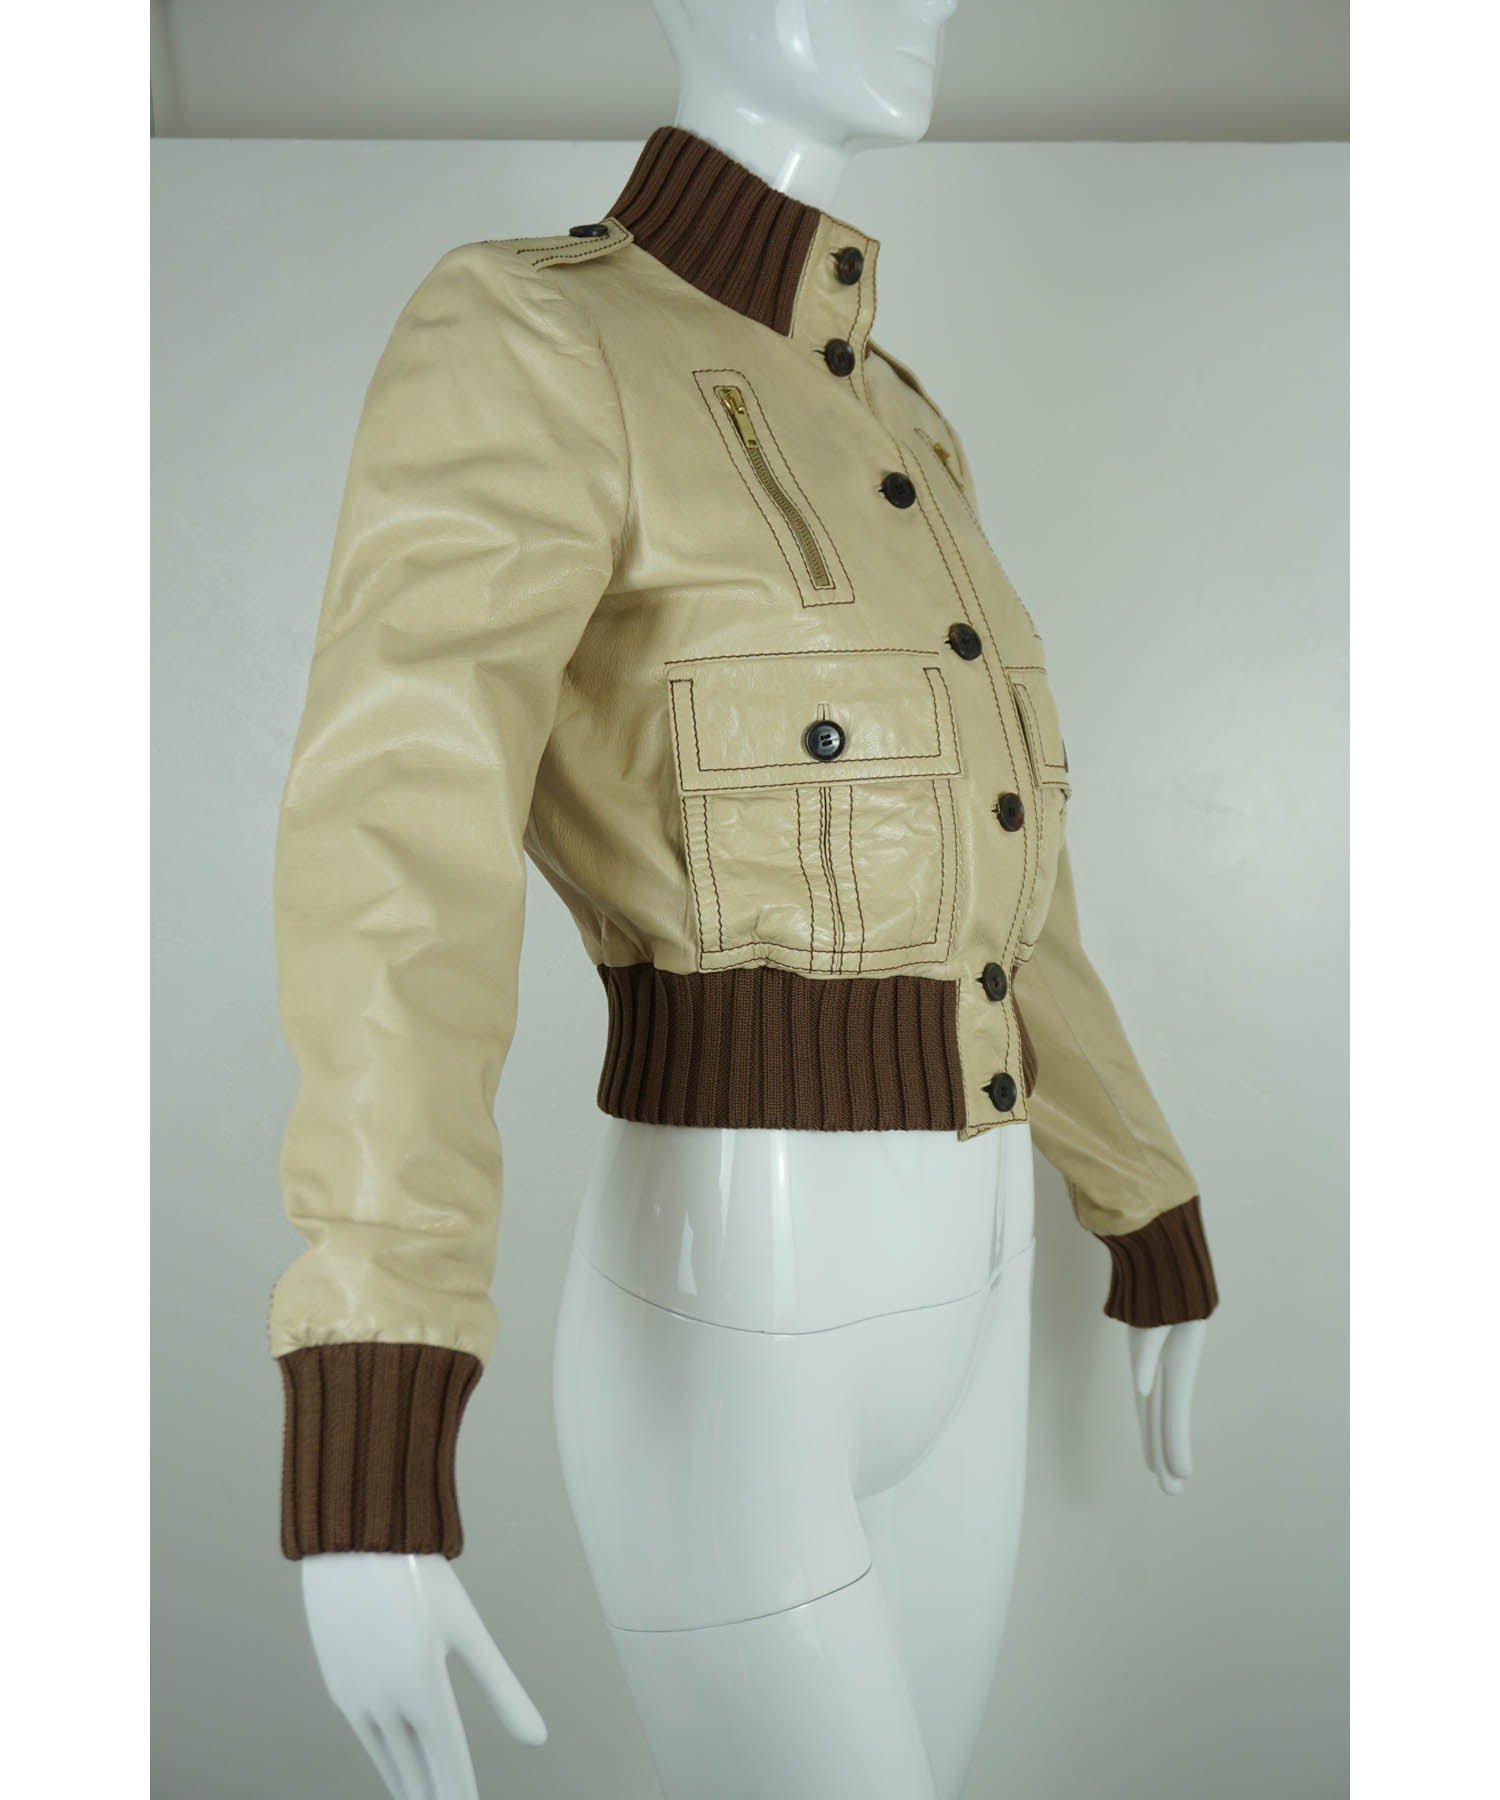 Gucci Cropped Leather Bomber Jacket Sz 42/6